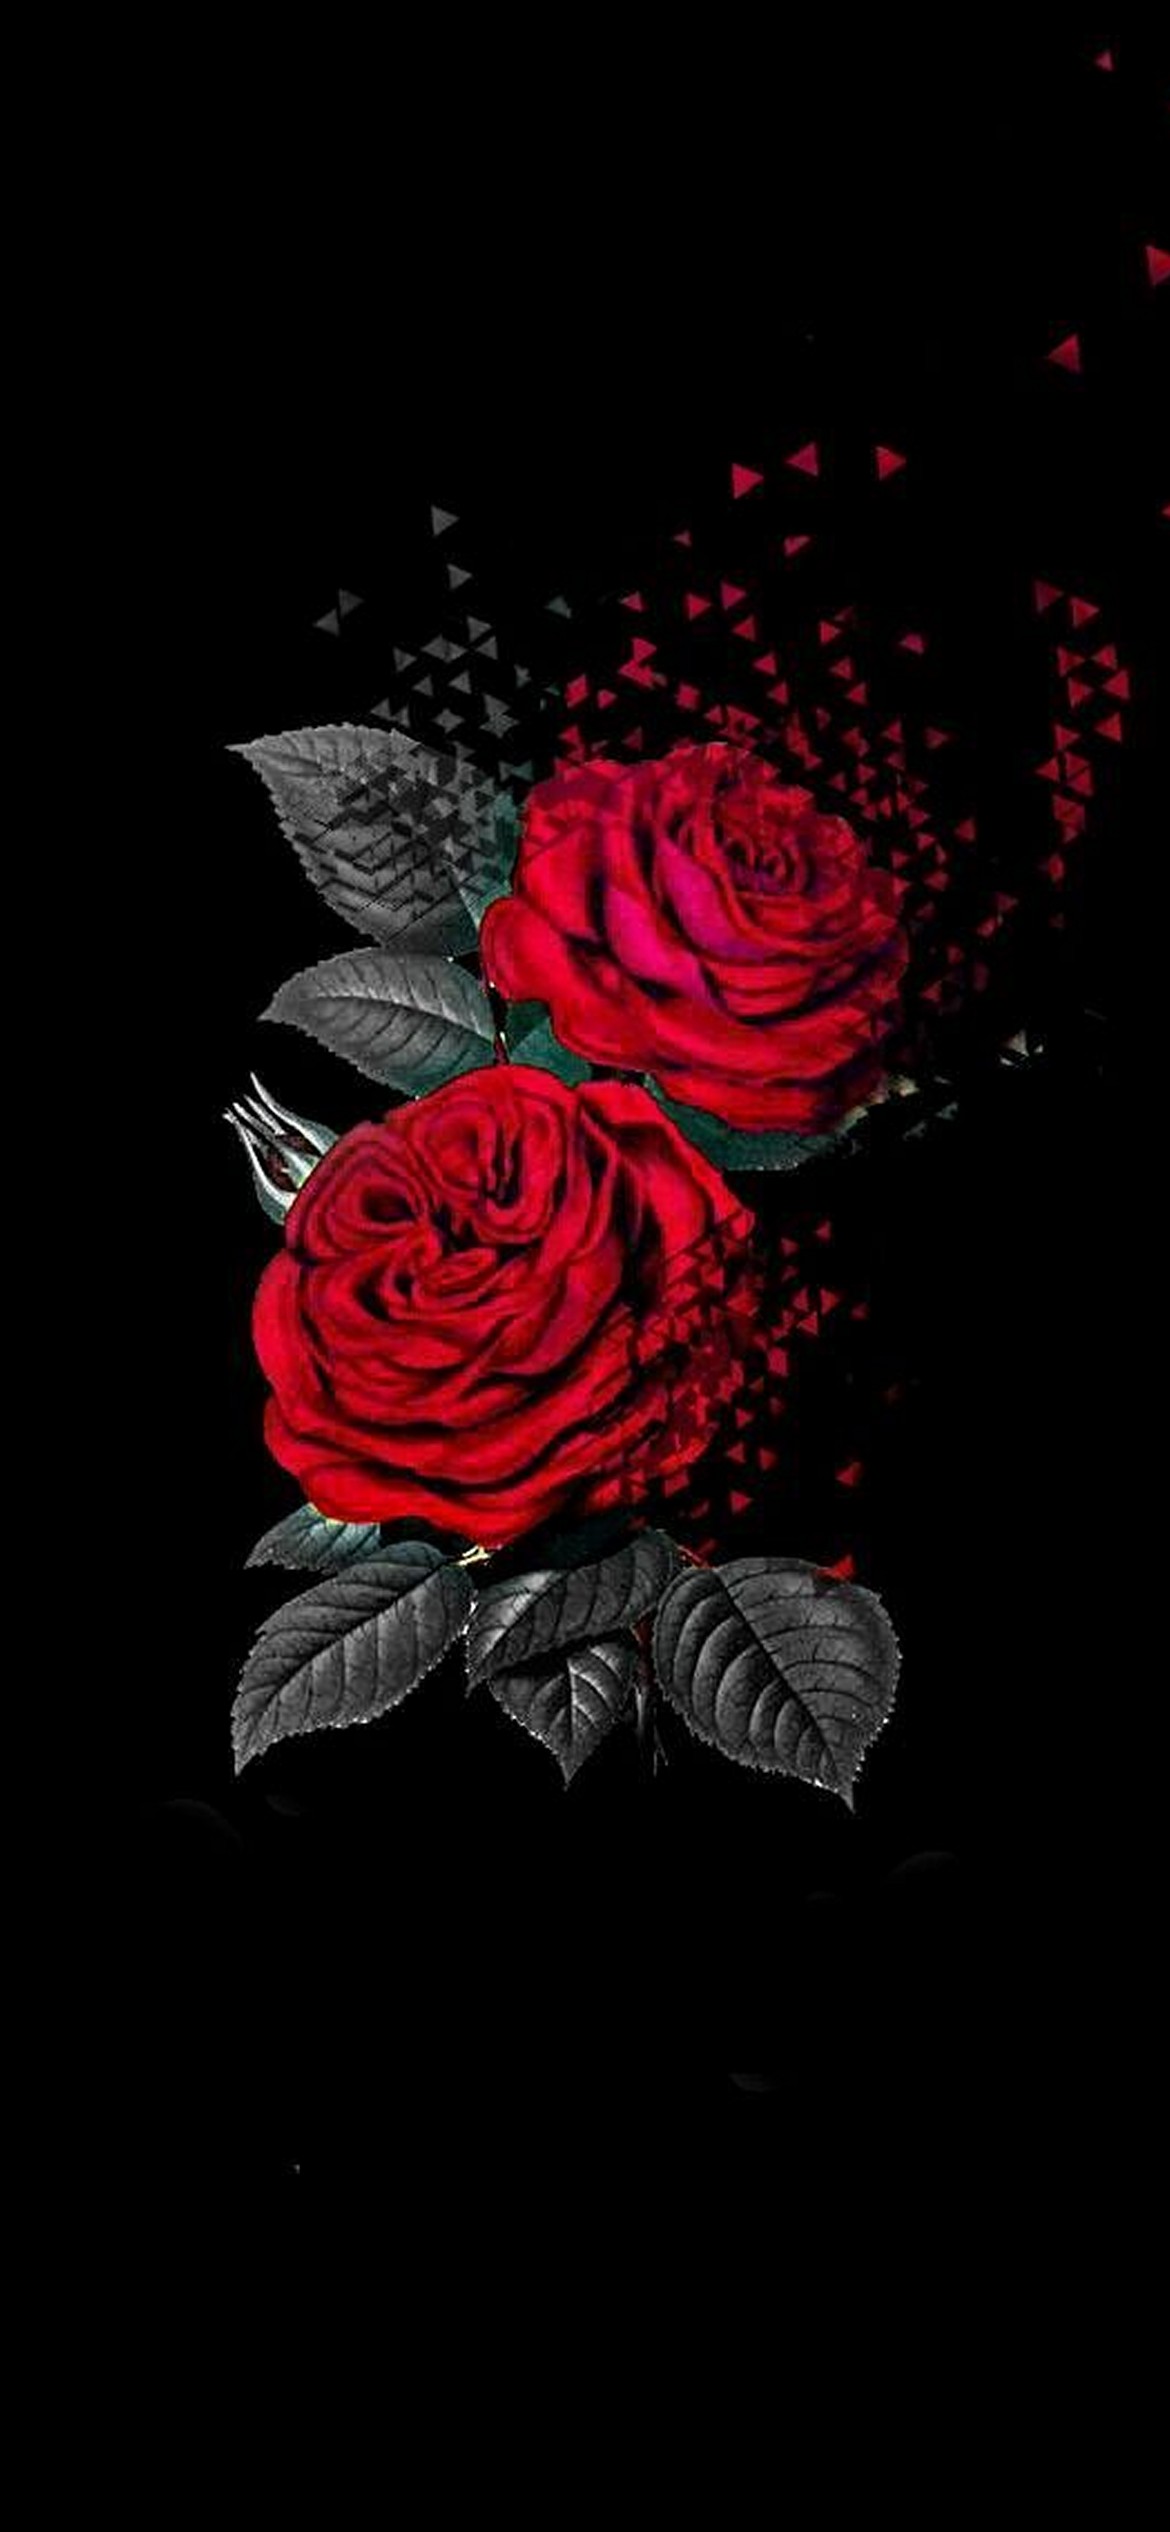 Rose Wallpaper For Iphone